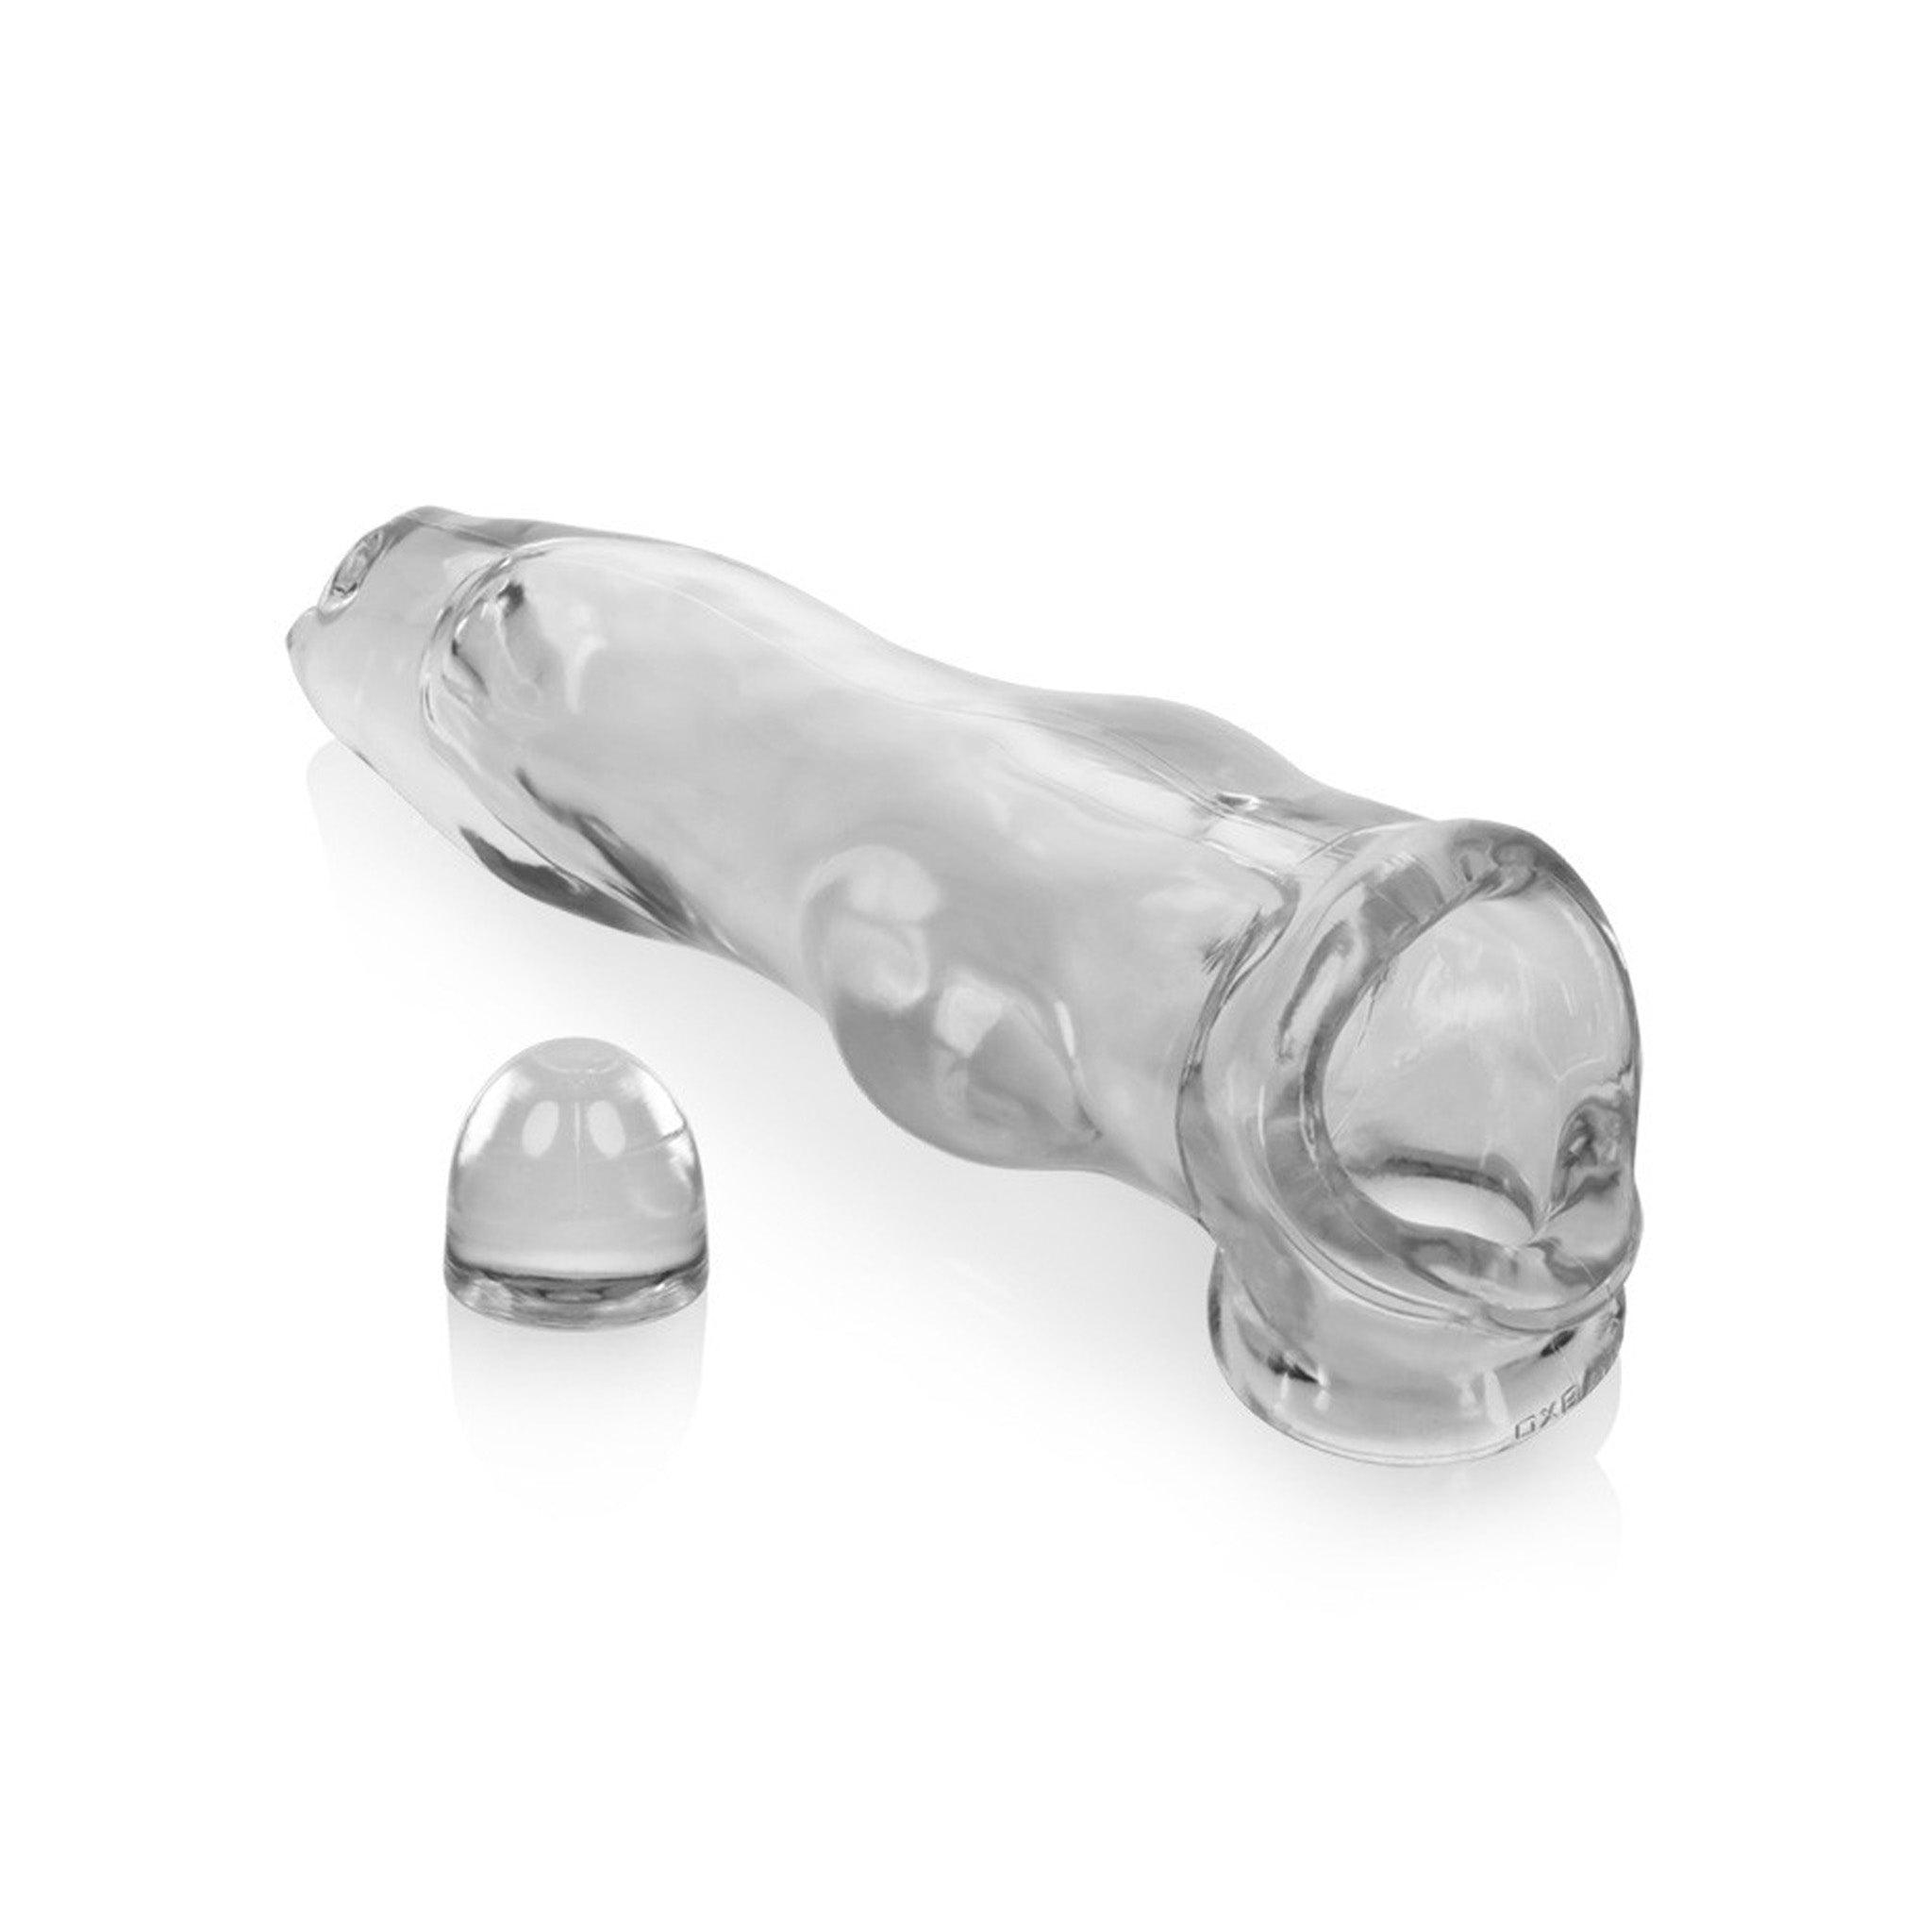 Oxballs FIDO Cocksheath with Adjustable Fit - Clear - CheapLubes.com